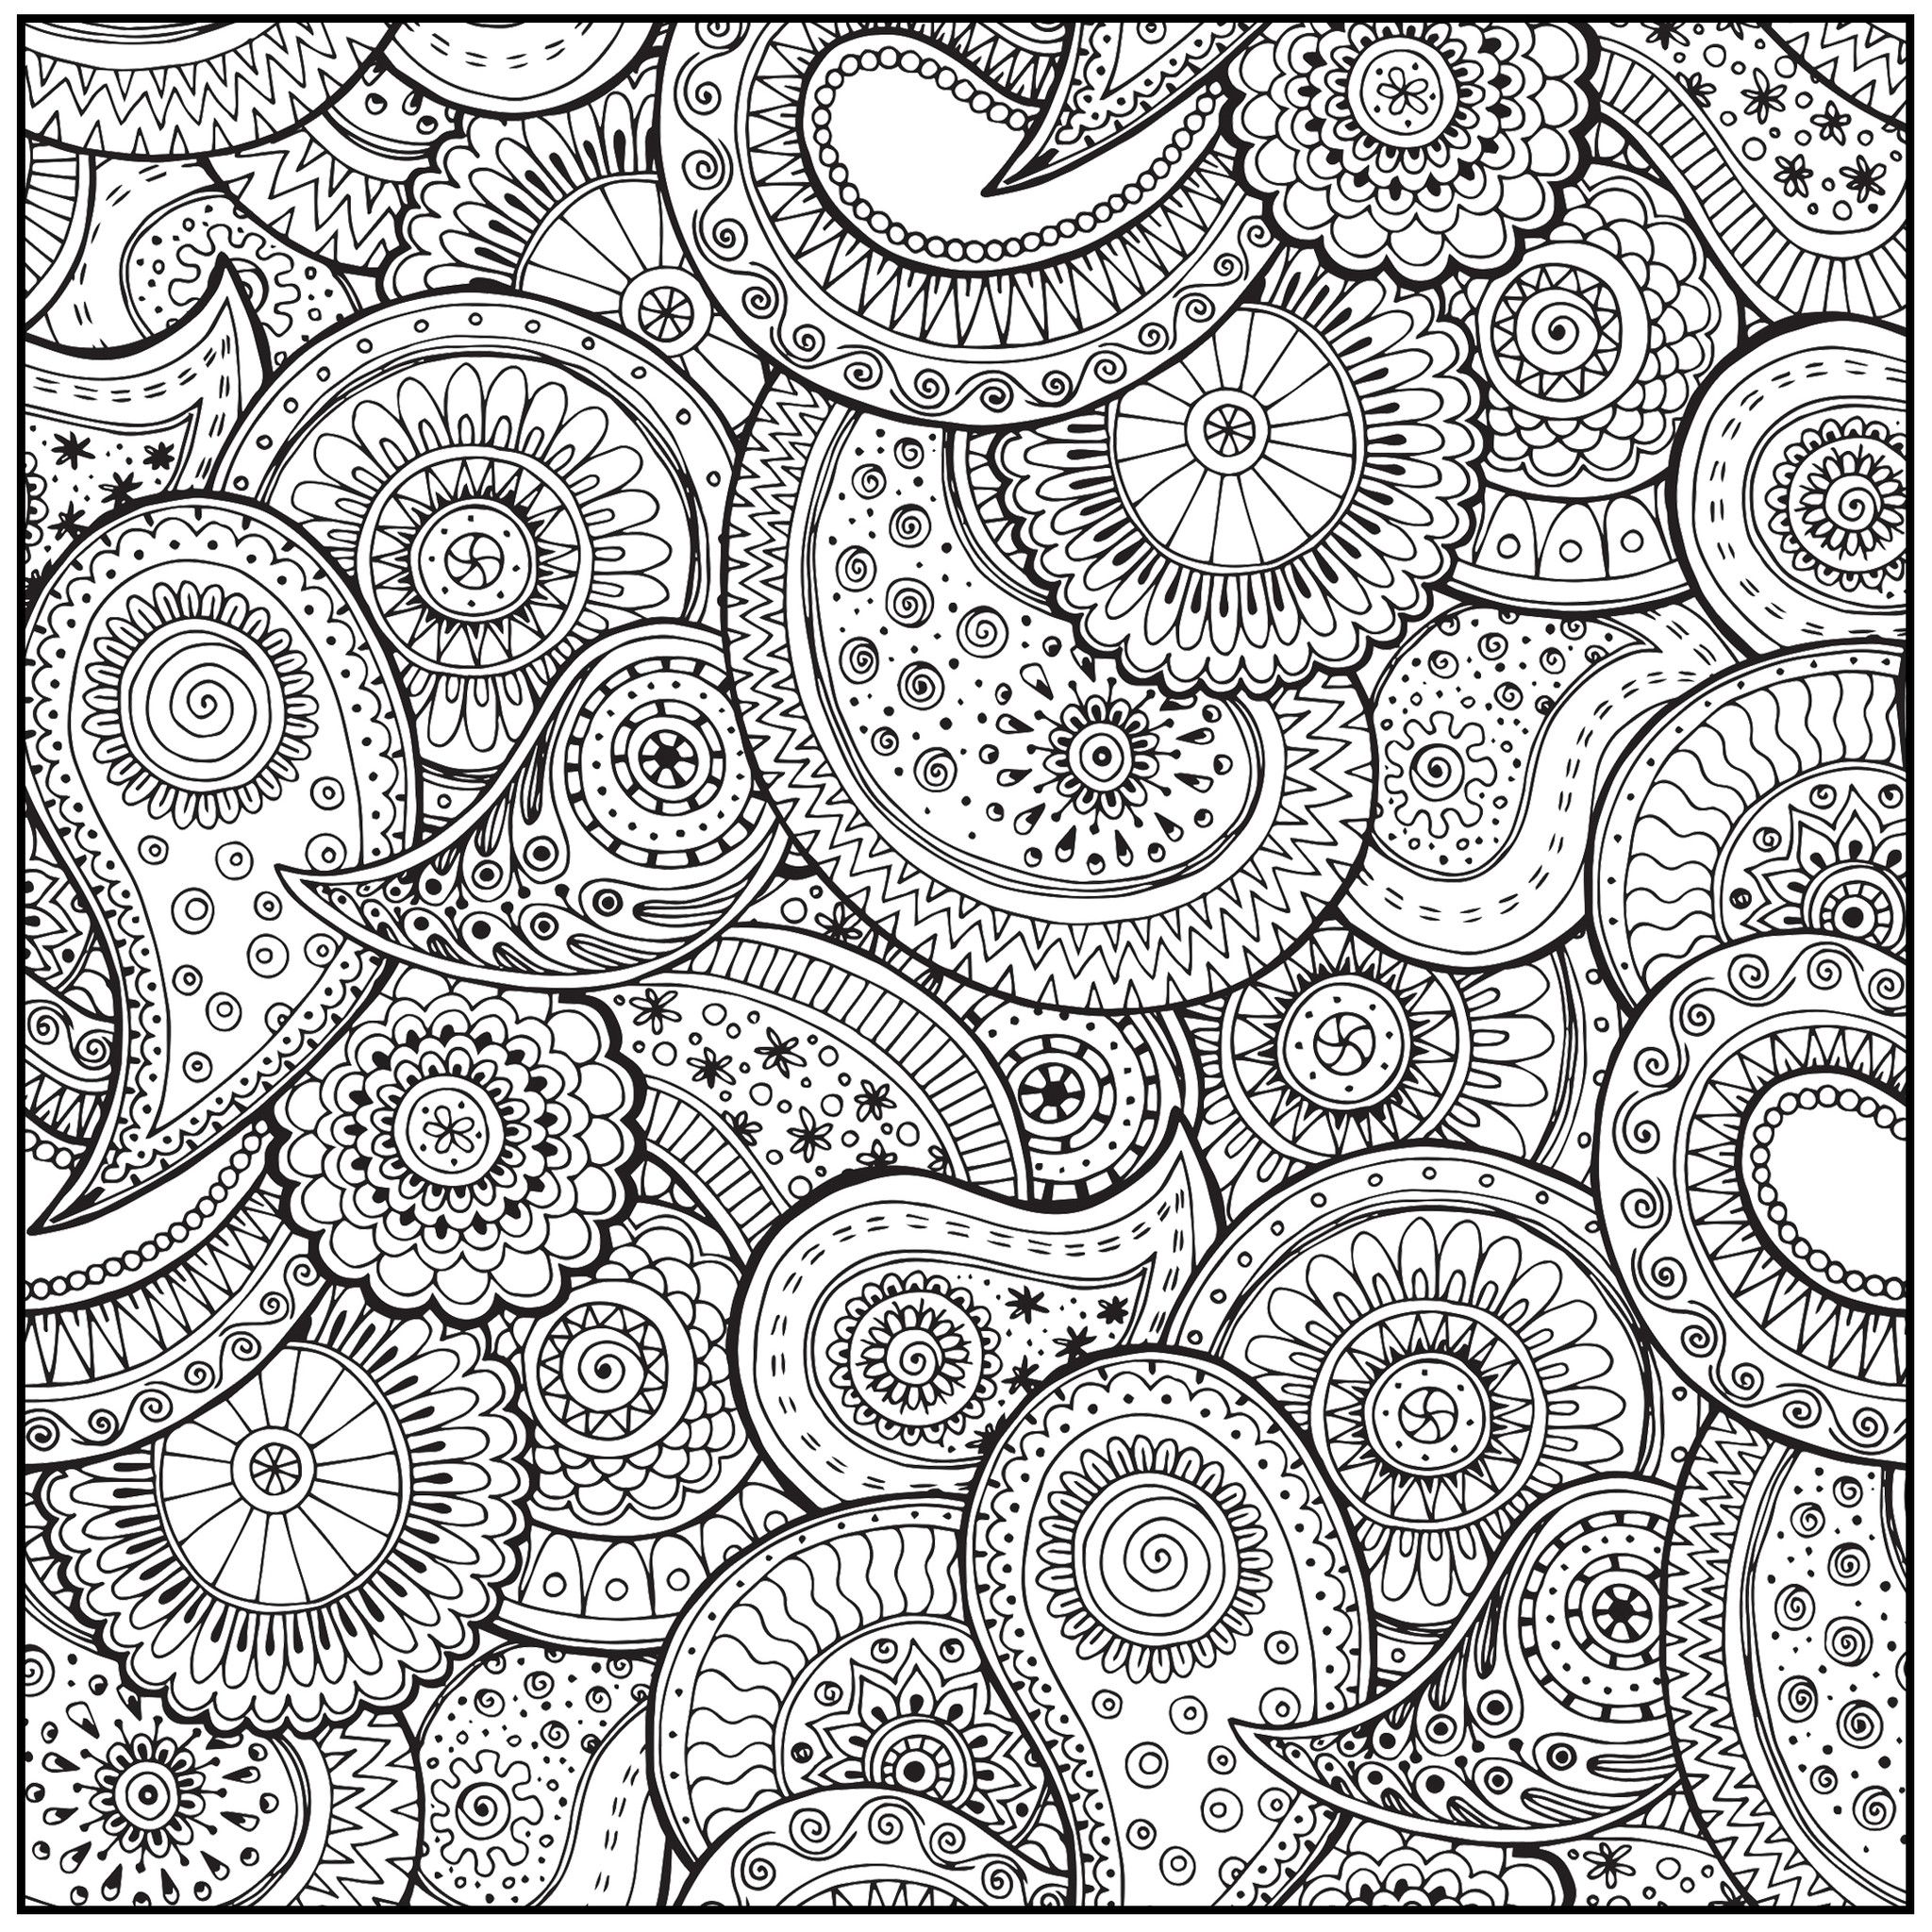 Collection of Adult Coloring Books tagged "Patterns" - ColorWithMusic